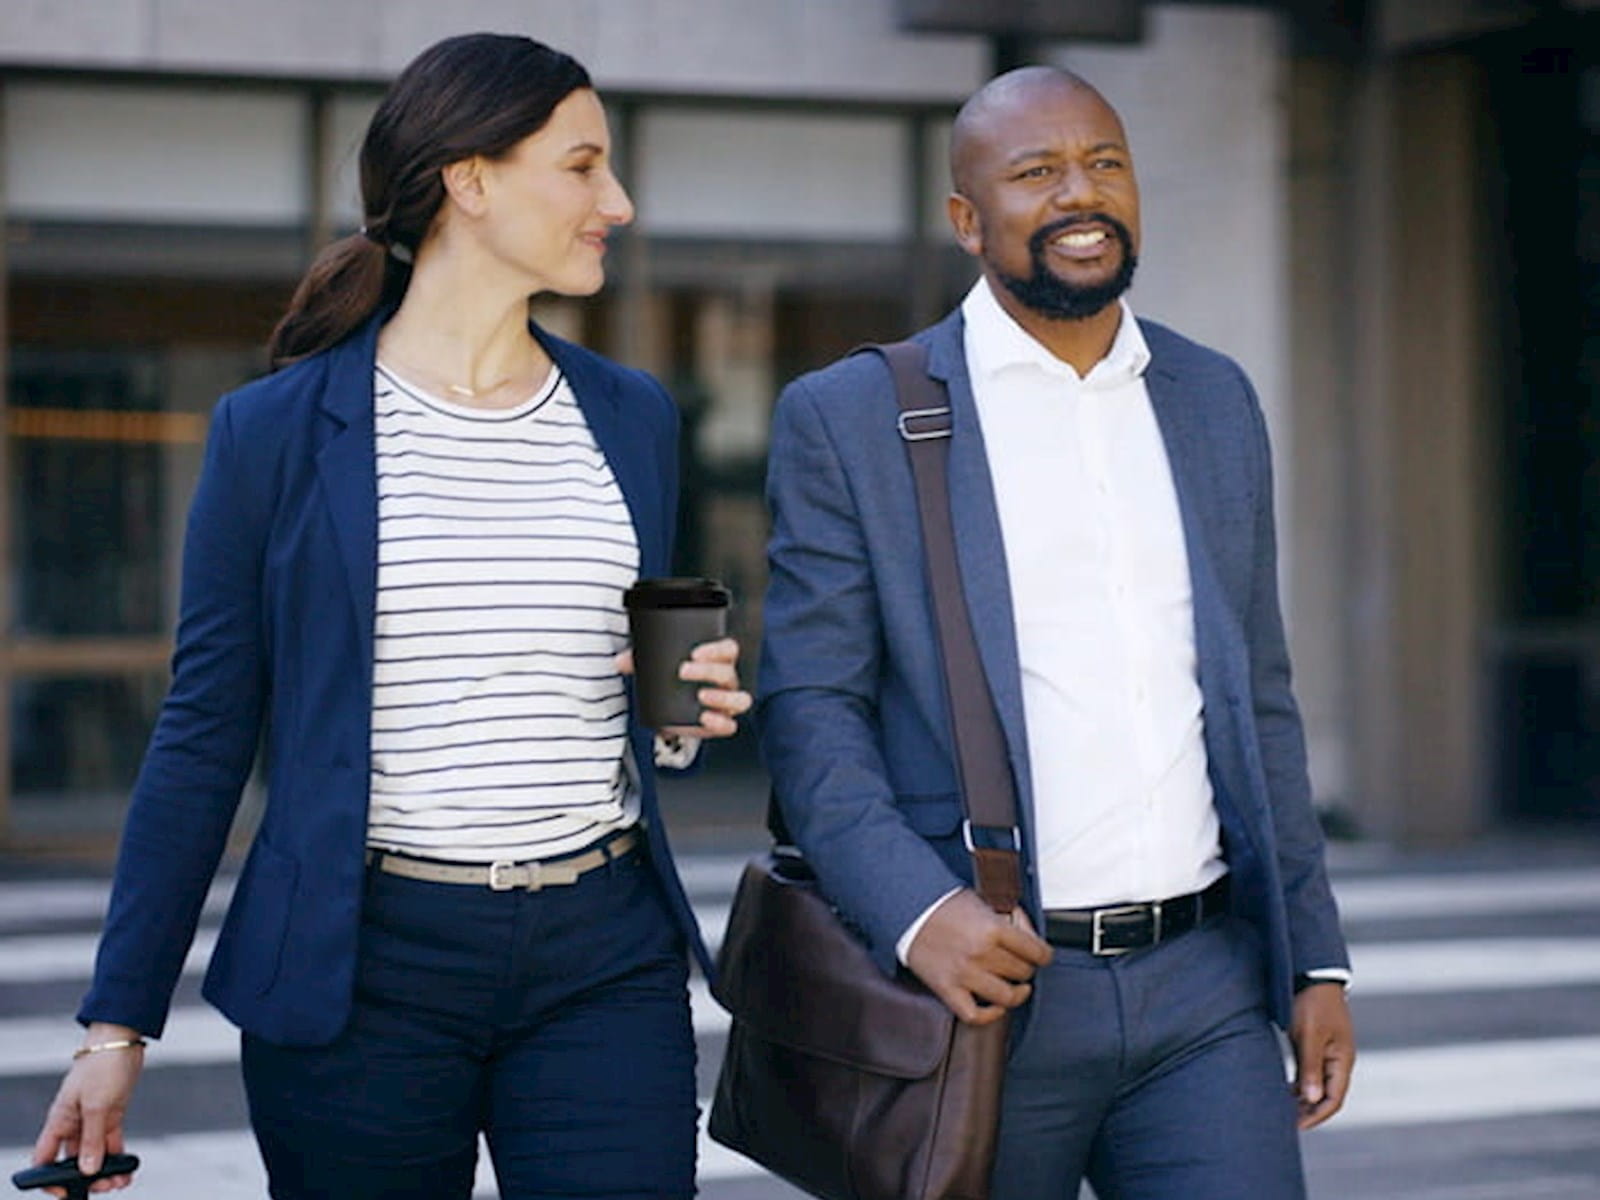 Two people in business attire walking outside together